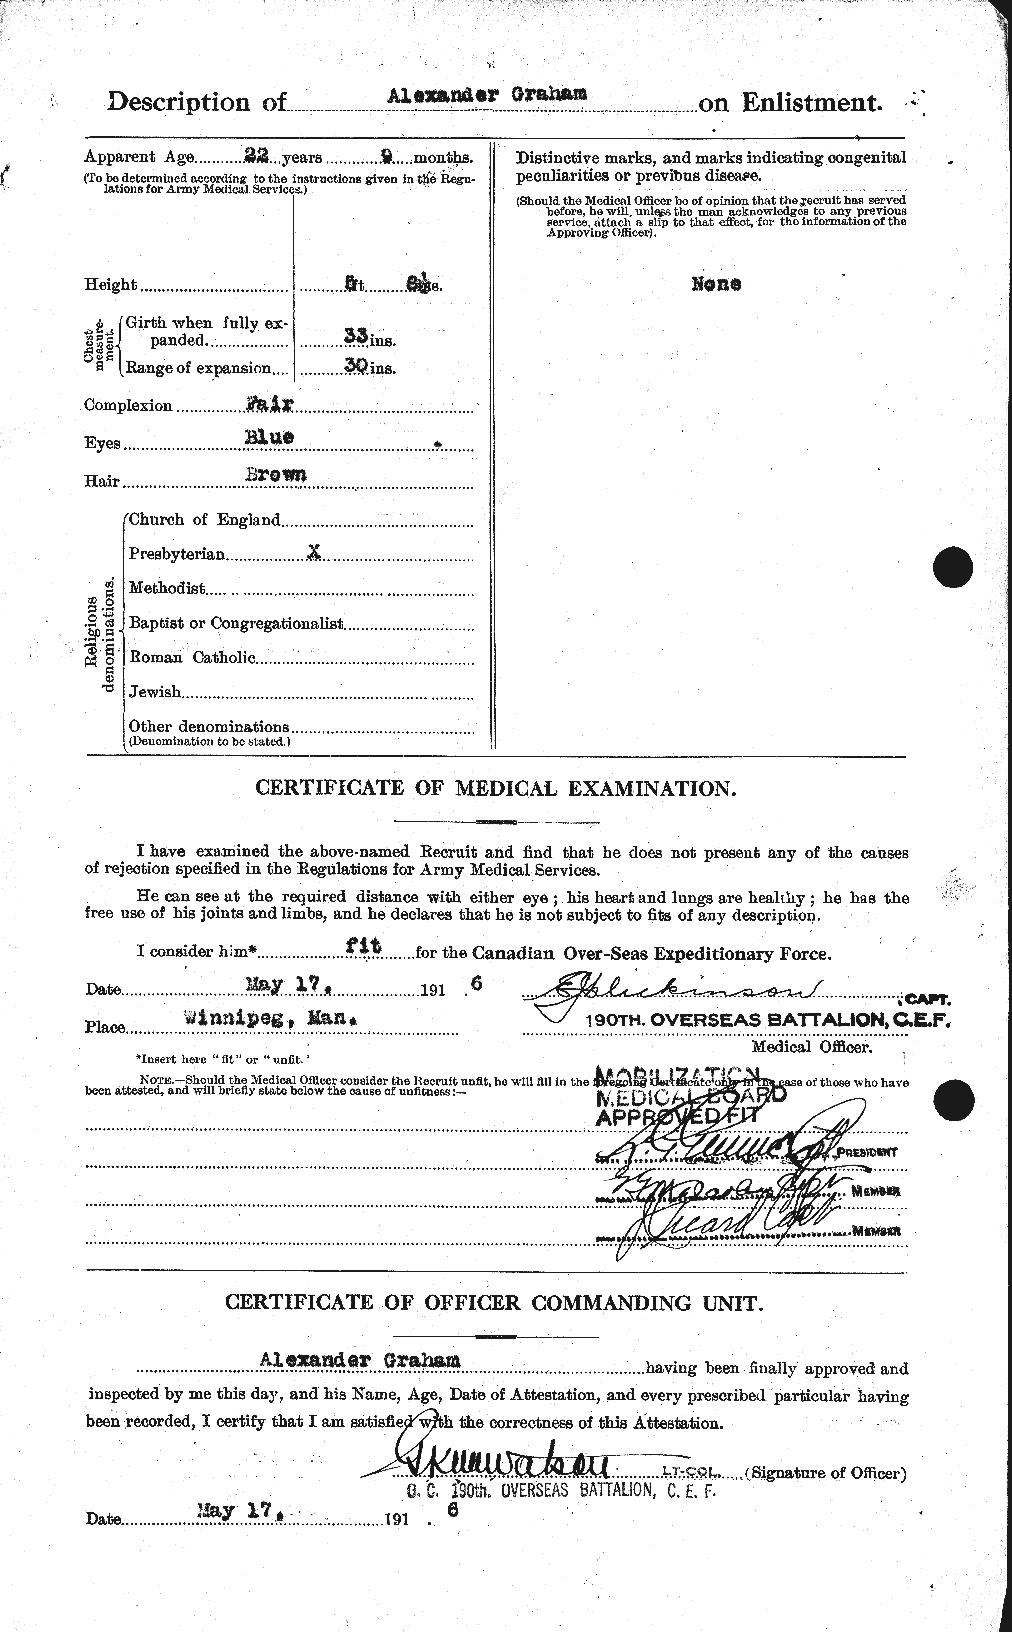 Personnel Records of the First World War - CEF 359577b